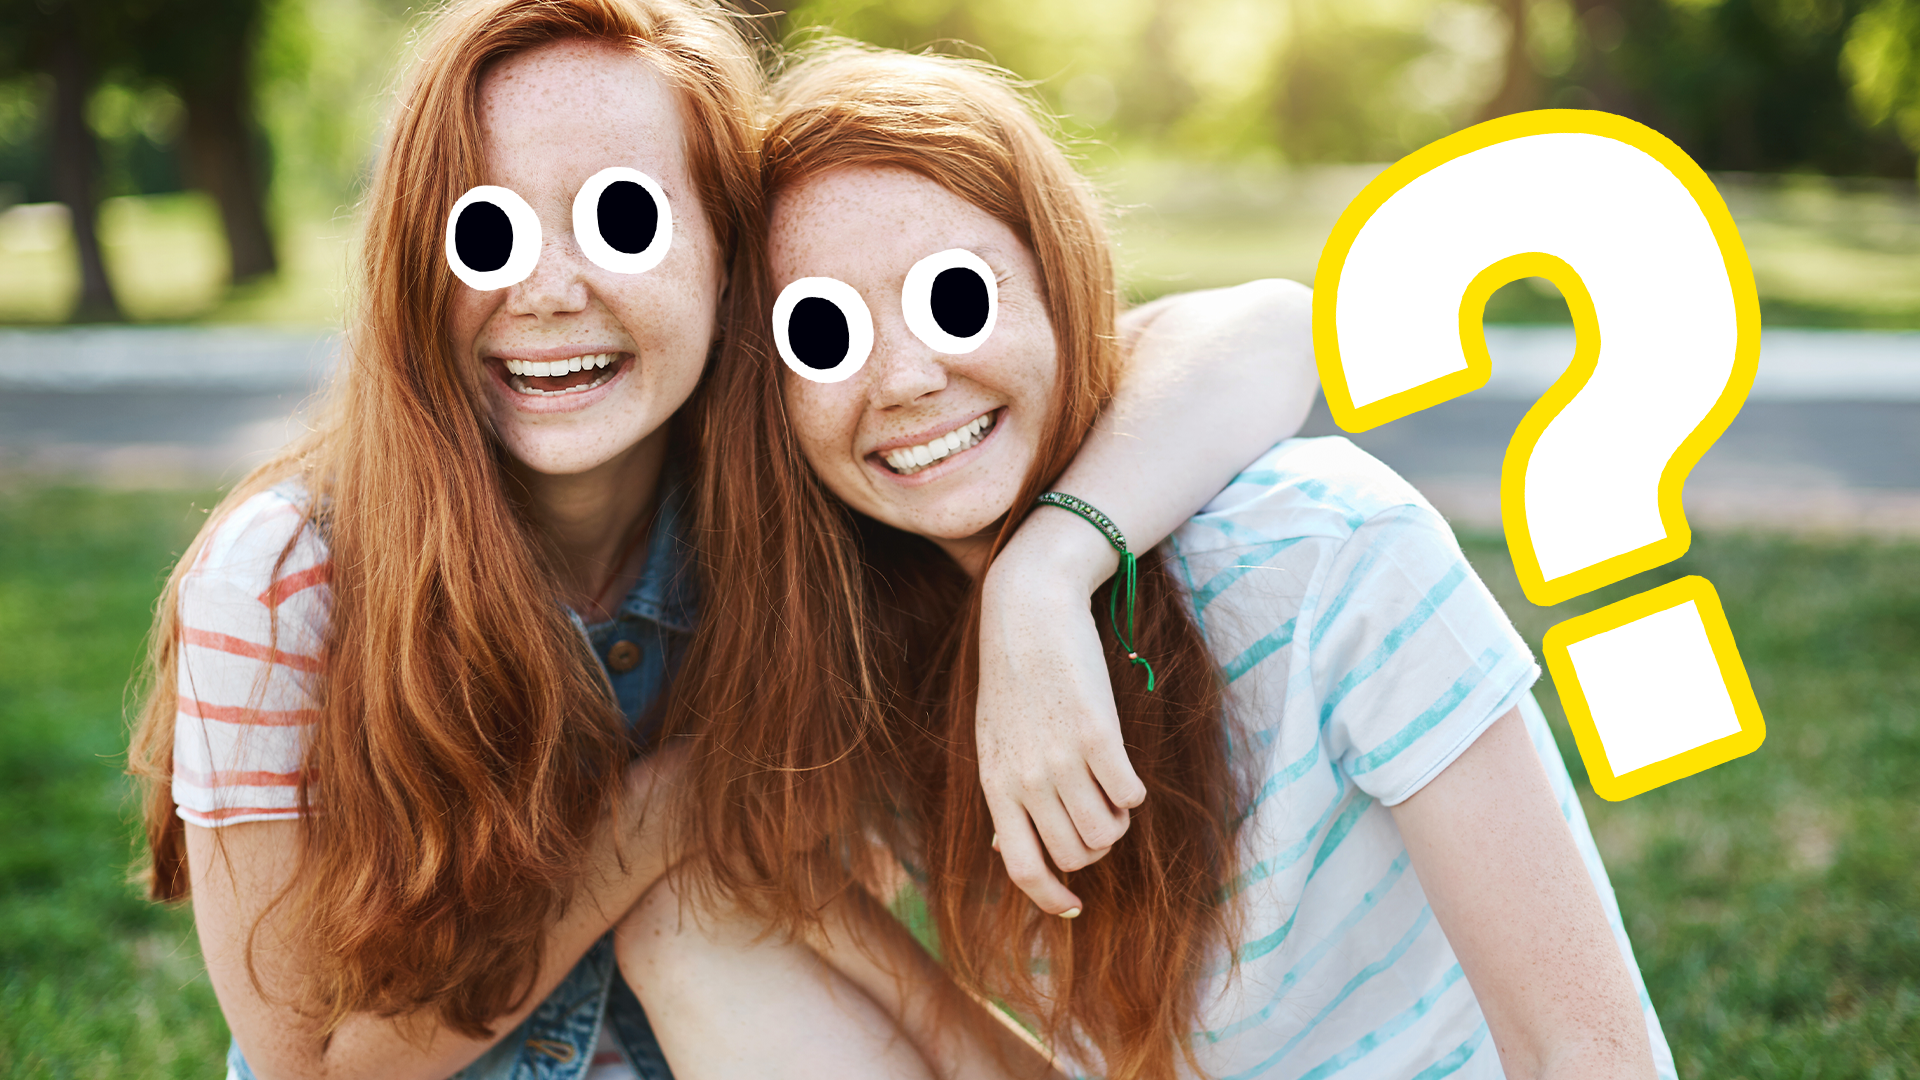 Two red haired girls outdoors with question mark